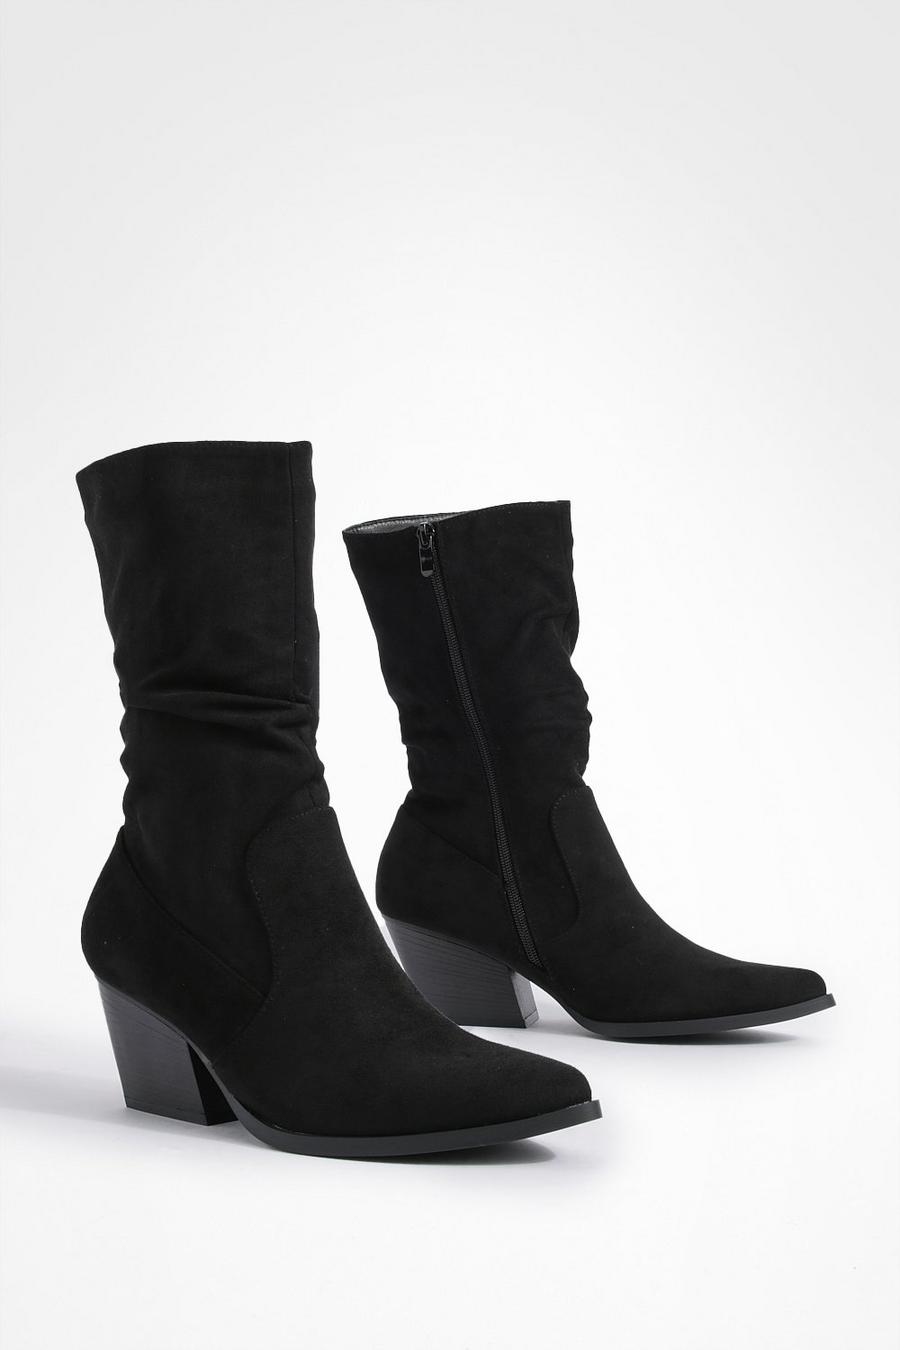 Black Ruched Casual Ankle Cowboy Boots